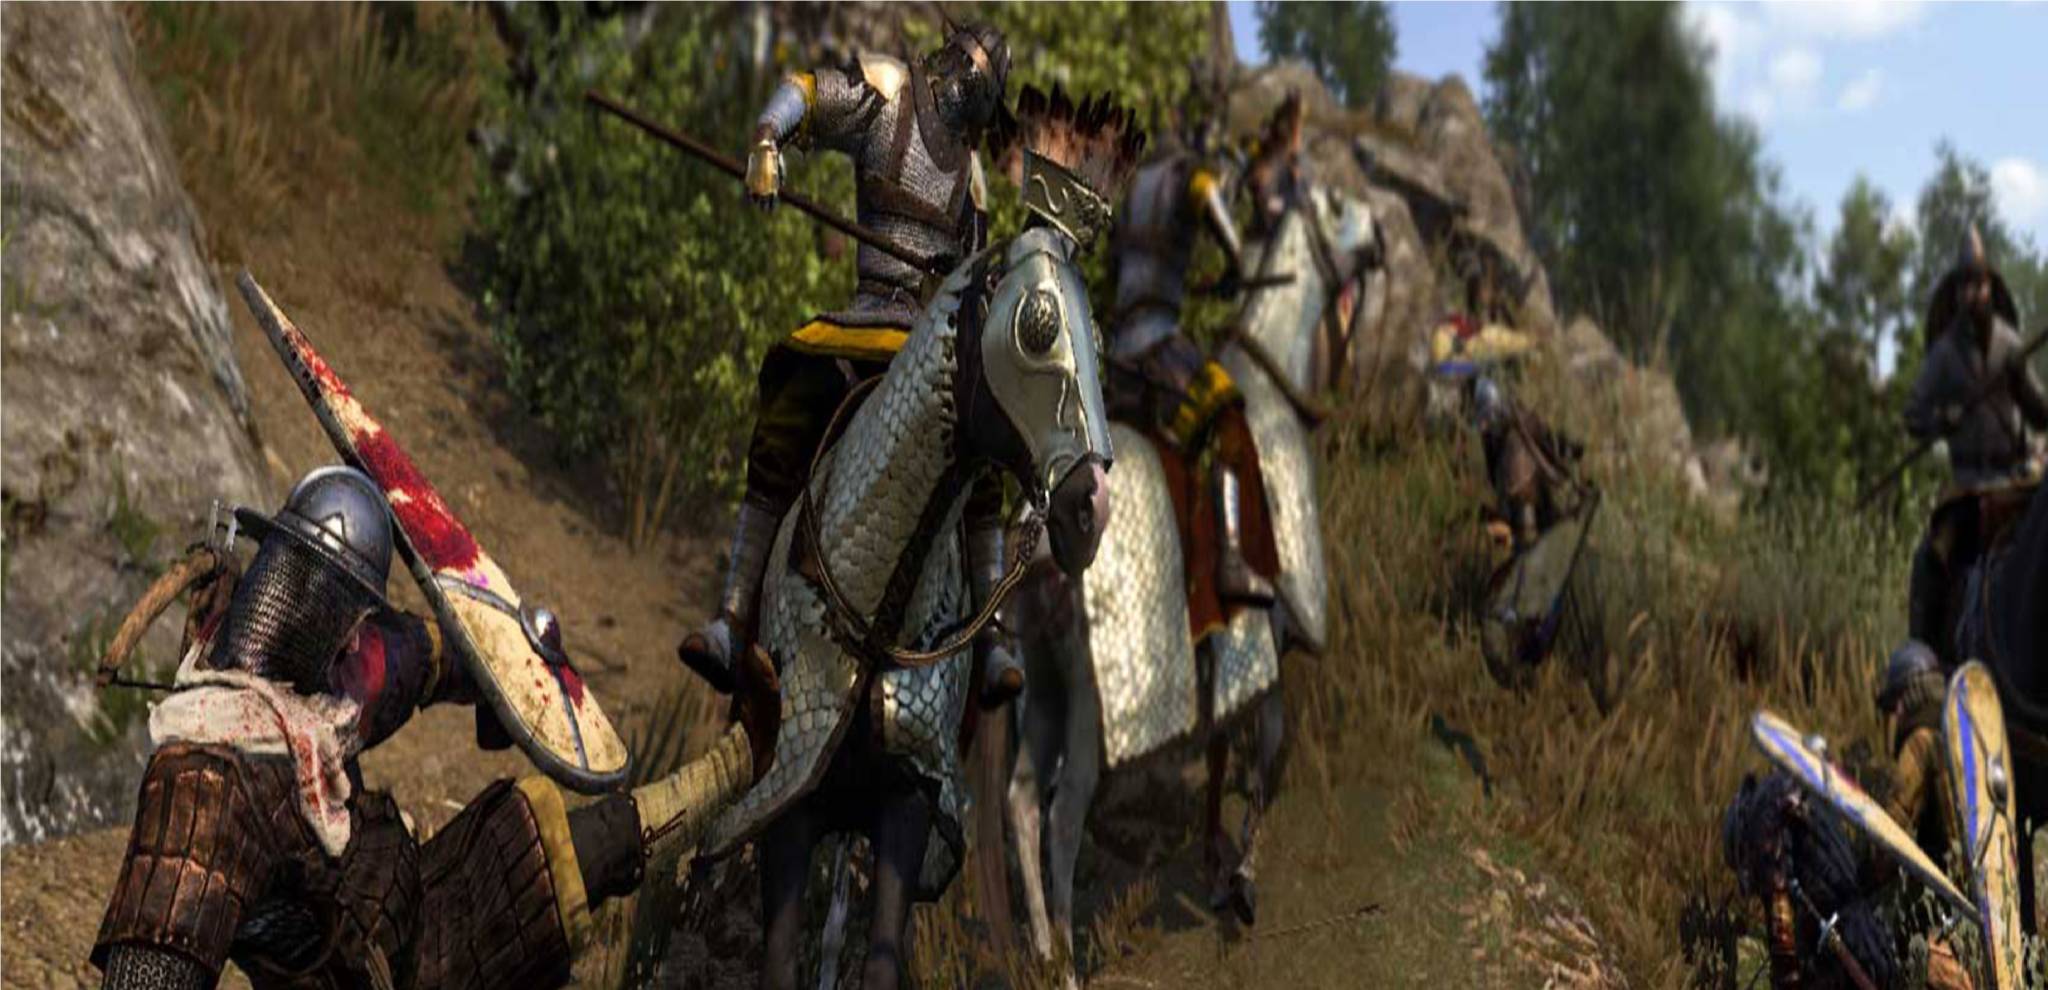 Mount & Blade Ii Bannerlord Mount & Blade 2 Bannerlord Best Troops Best Units How To Recruit The Best Units Feat